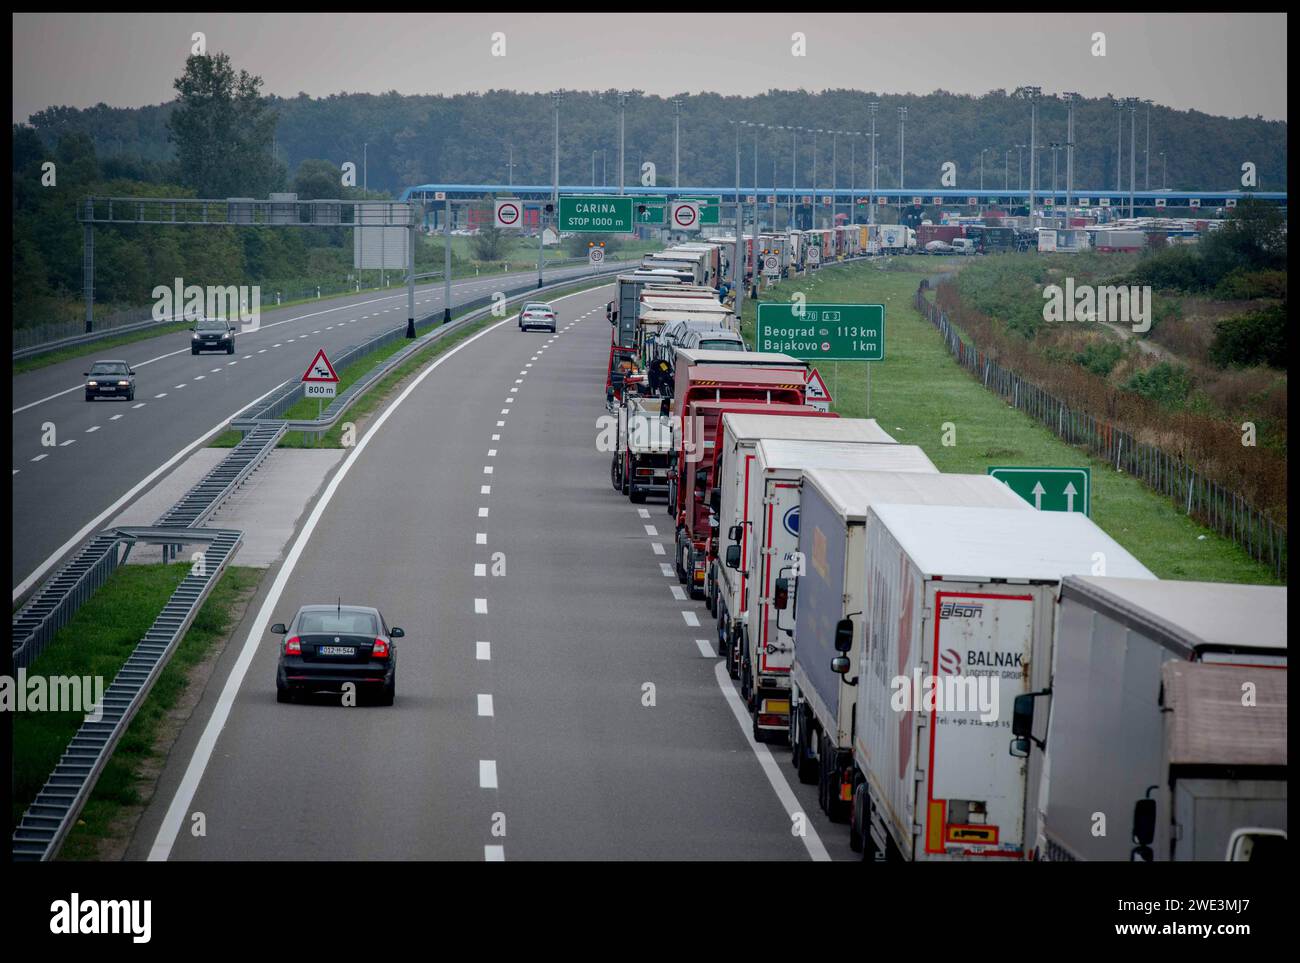 Image ©Licensed to Parsons Media. 22/09/2015.Croatia. Migrants in Croatia. Migrant children.   Croatia. Trucks queue on the side of the motorways at Tovarnik, Croatia, as they wait to cross the Serbian Border. Picture by Andrew Parsons / Parsons Media Stock Photo